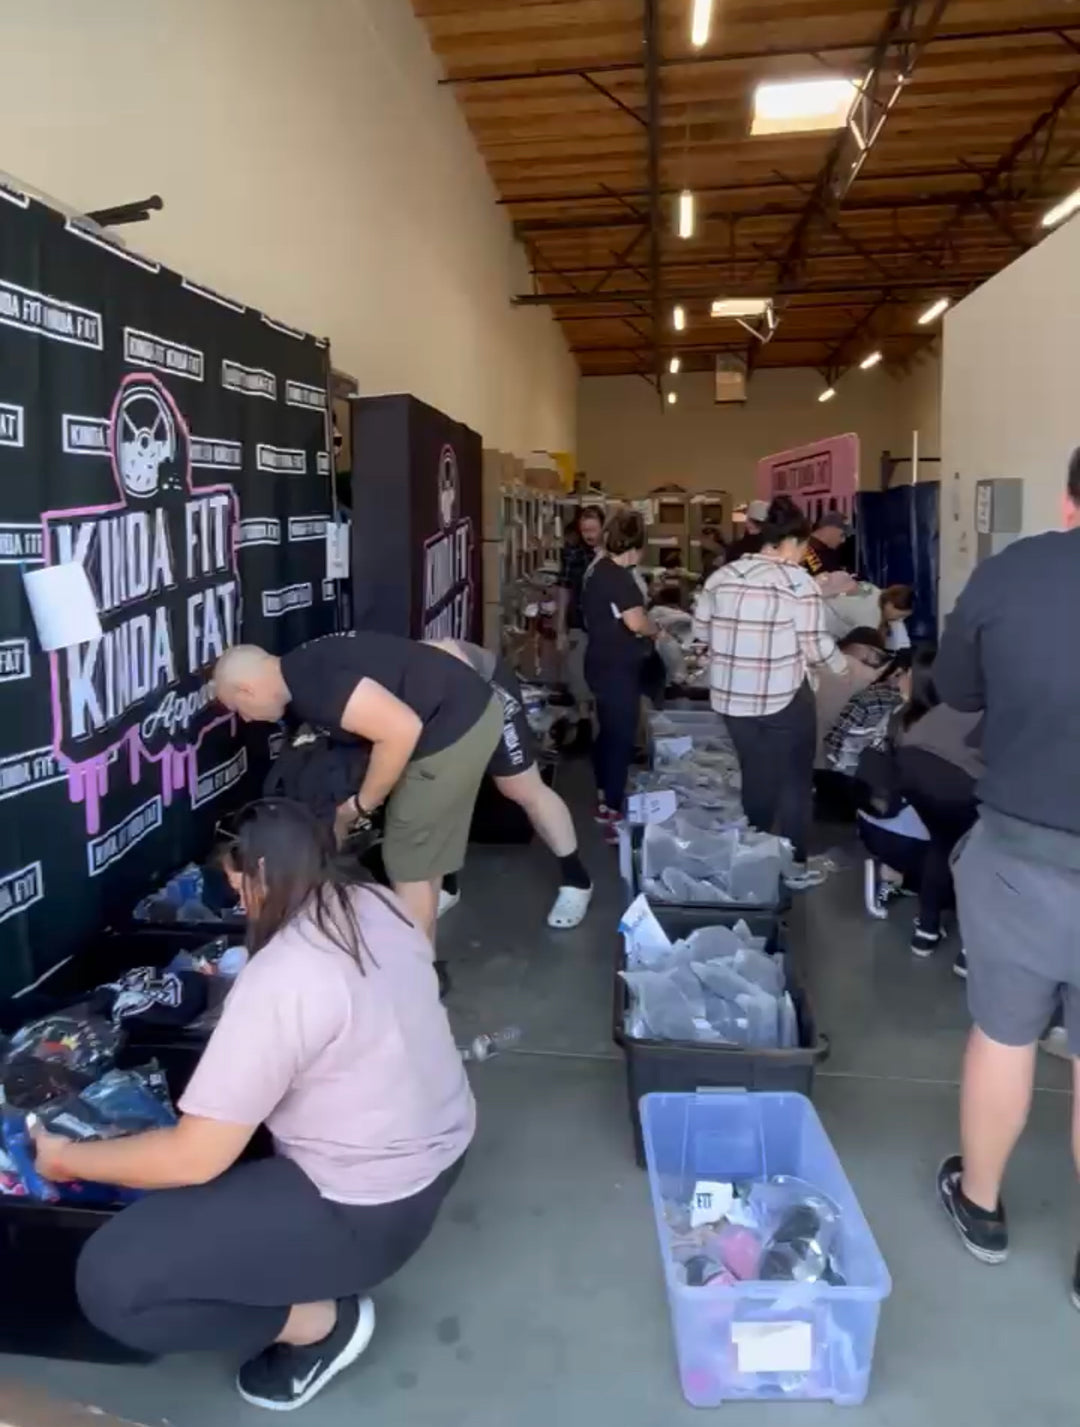 Our Very First Kinda Fit Kinda Fat "Burnt Batch" Warehouse Sale!